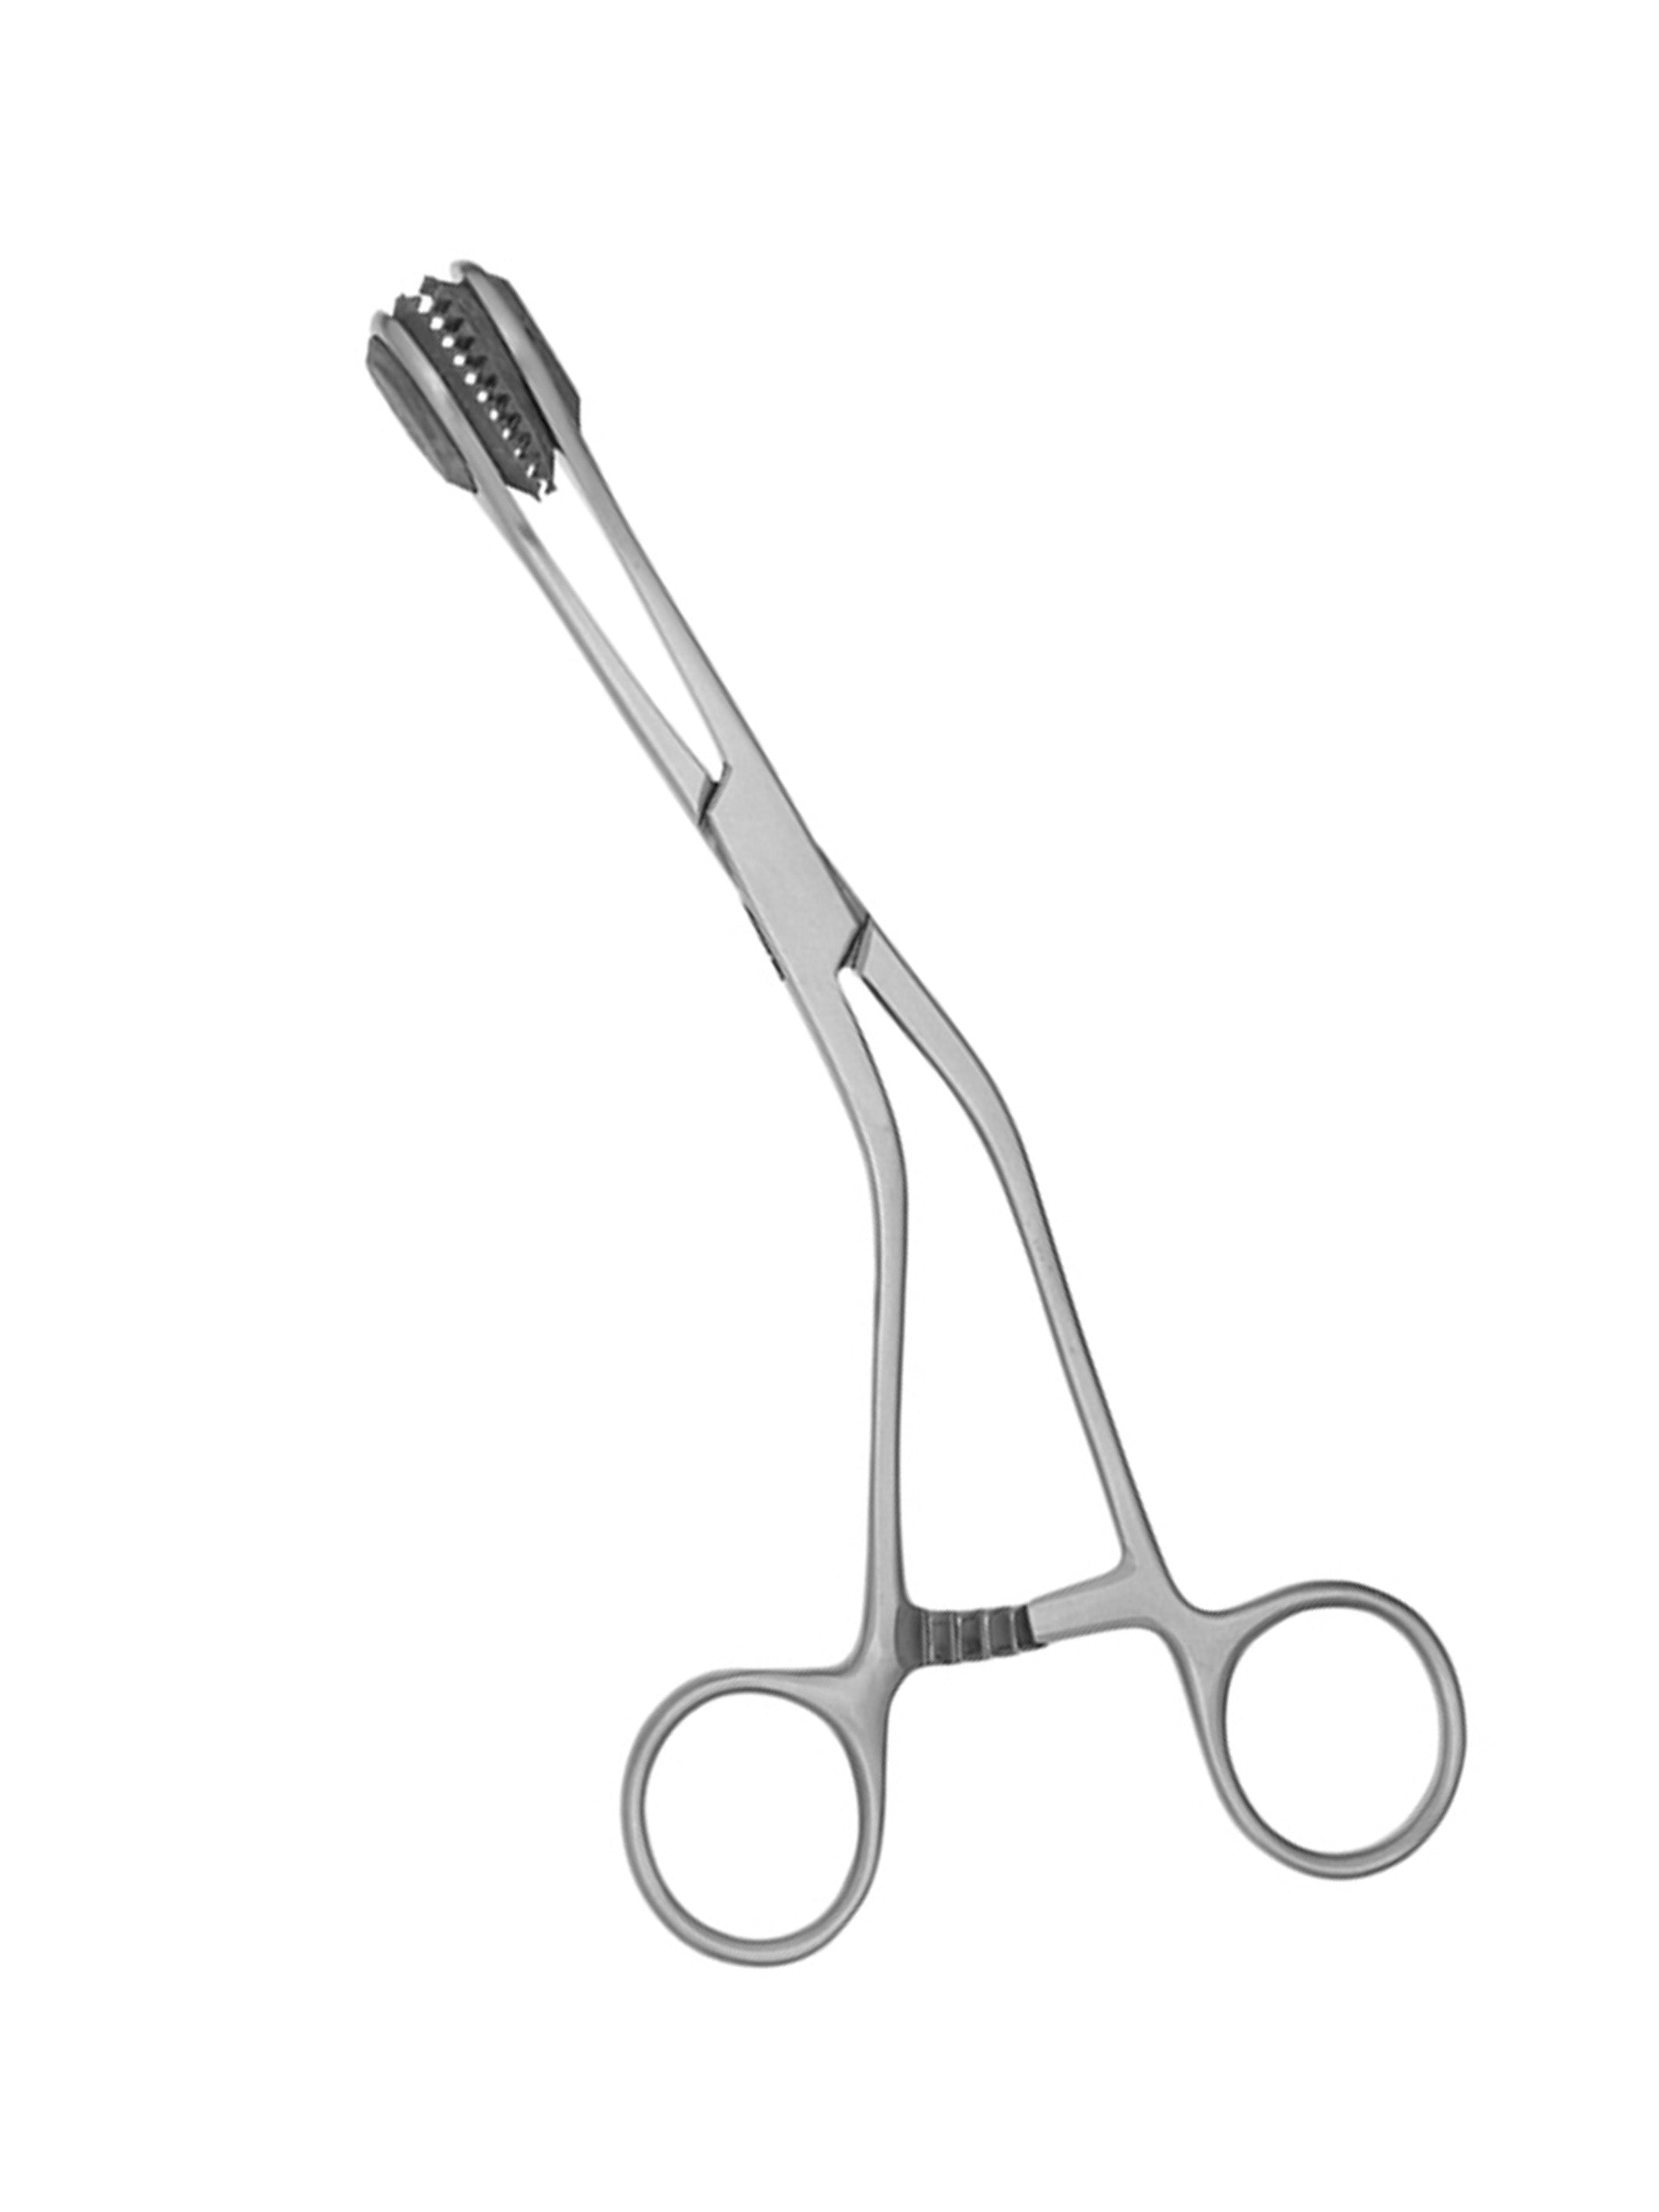 Anesthesia Instruments